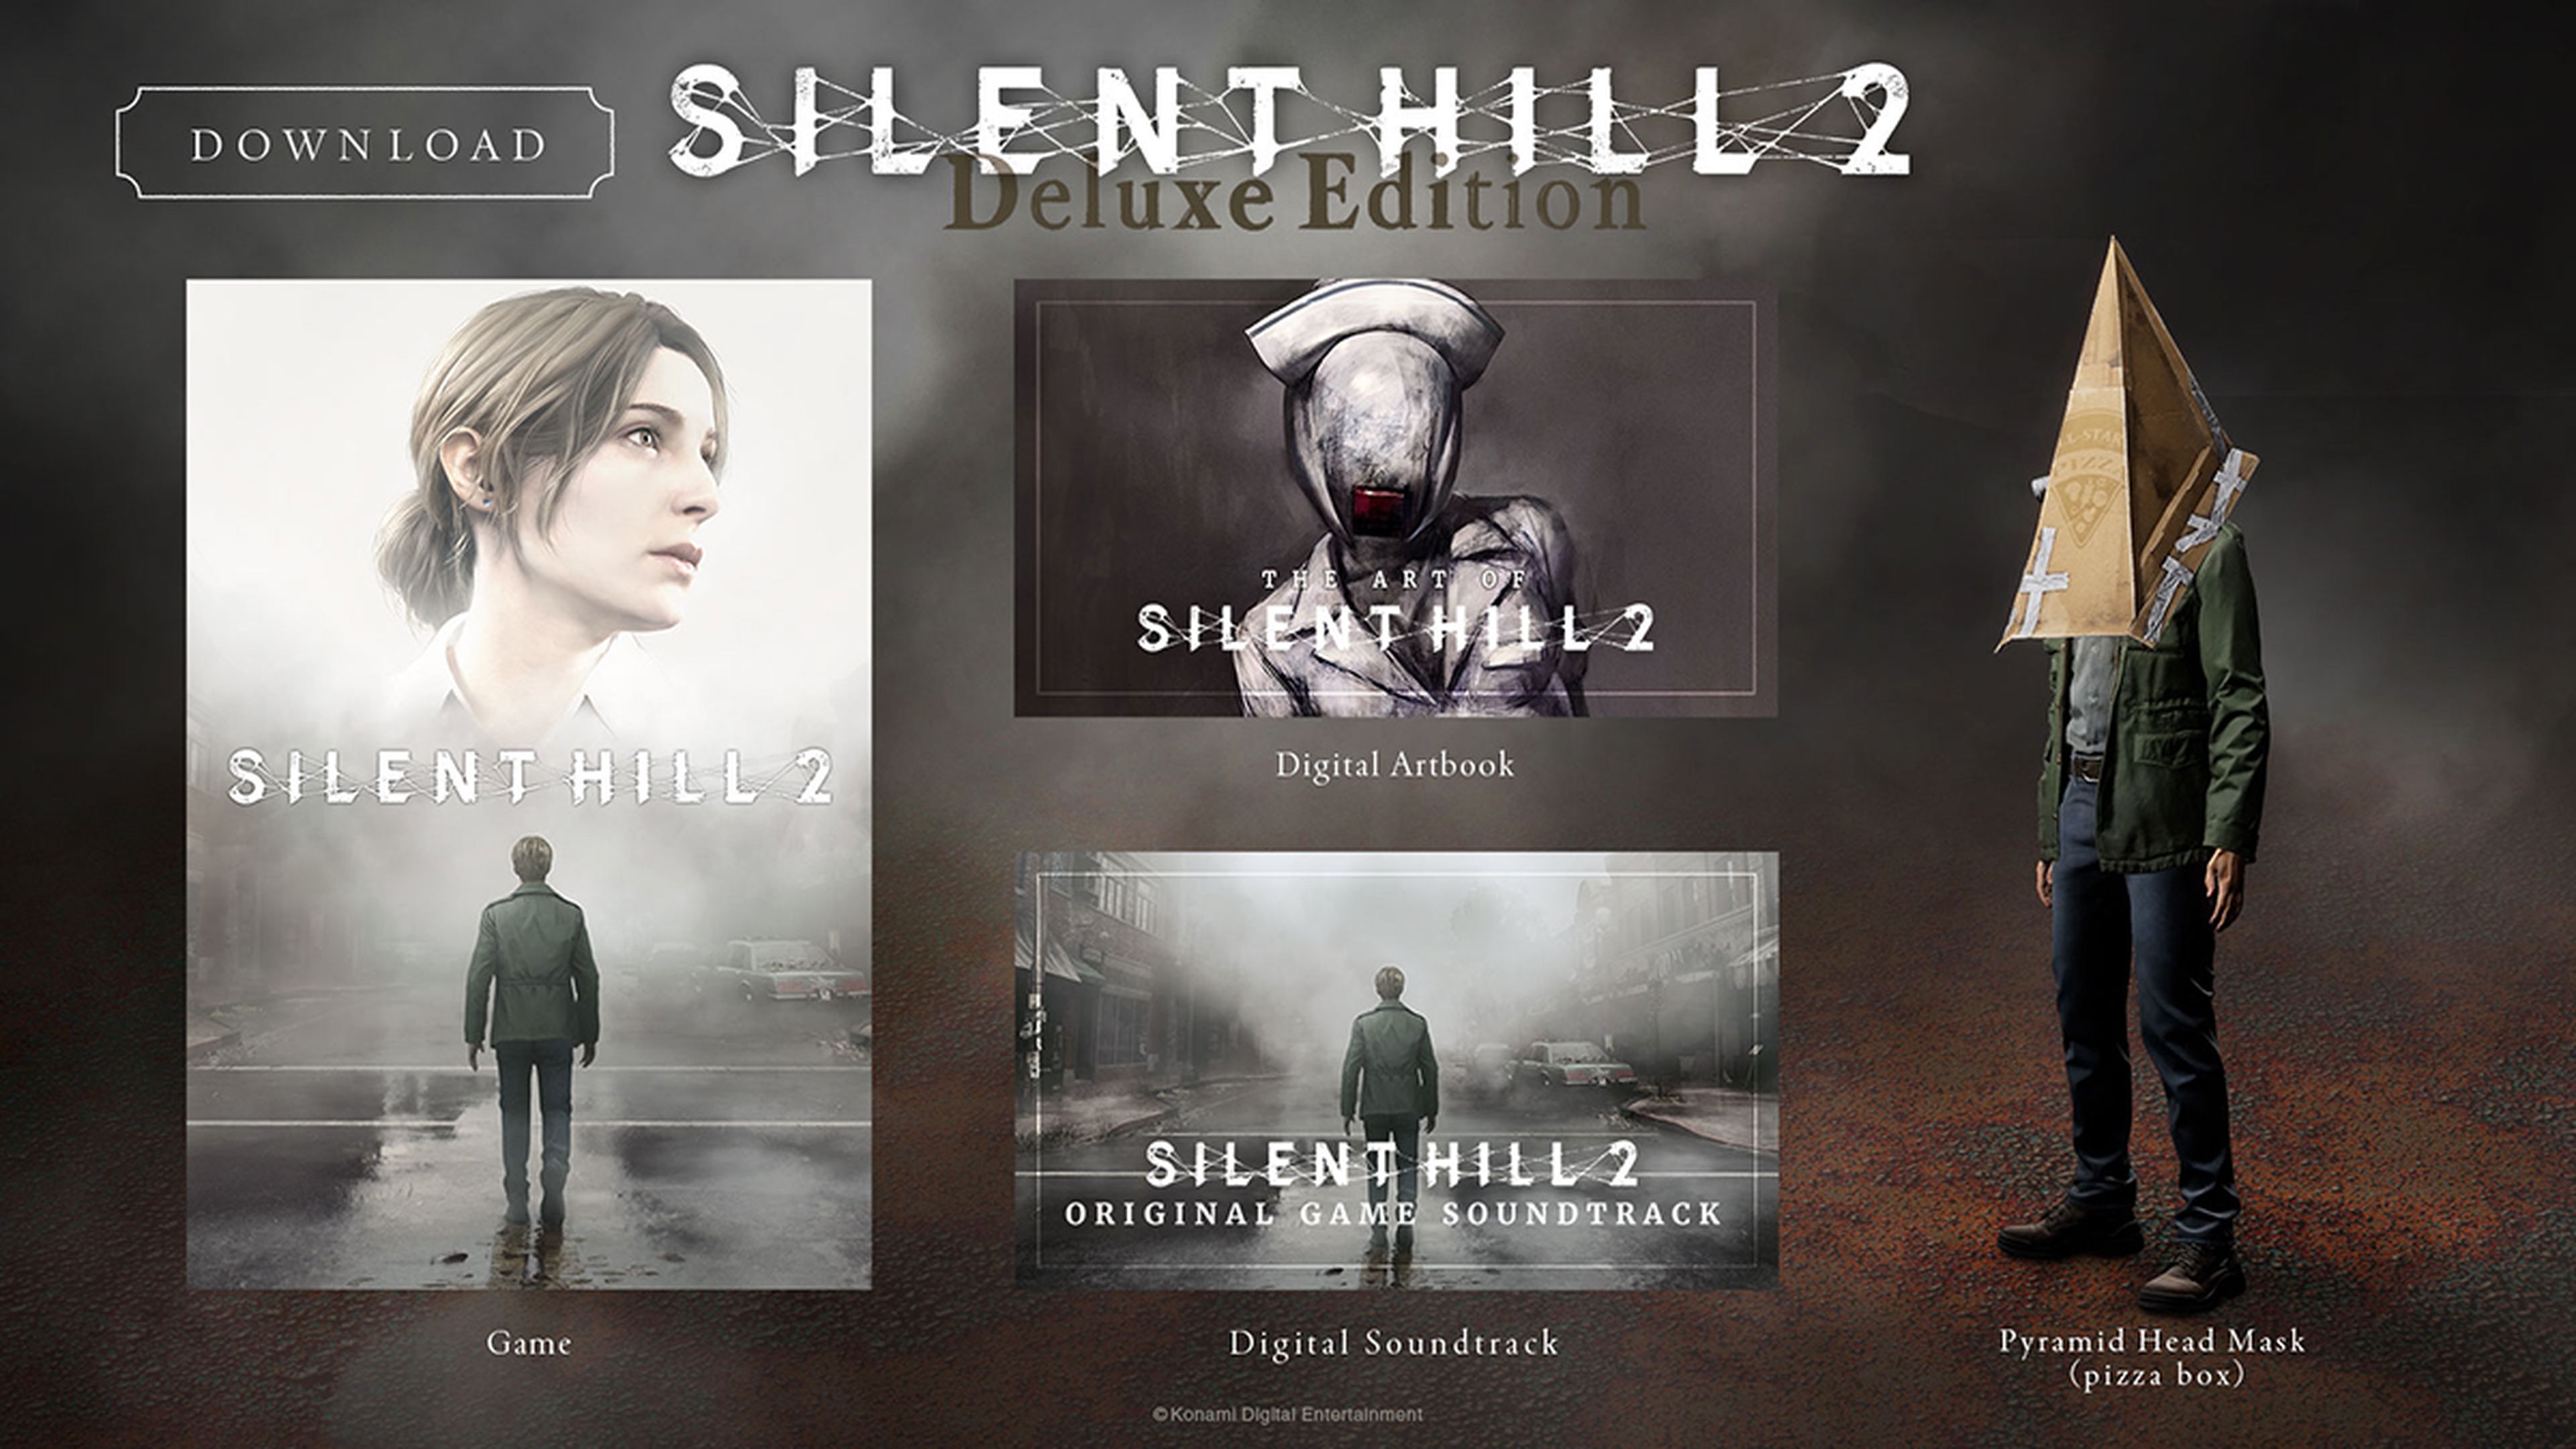 Silent Hill 2 Deluxe Edition